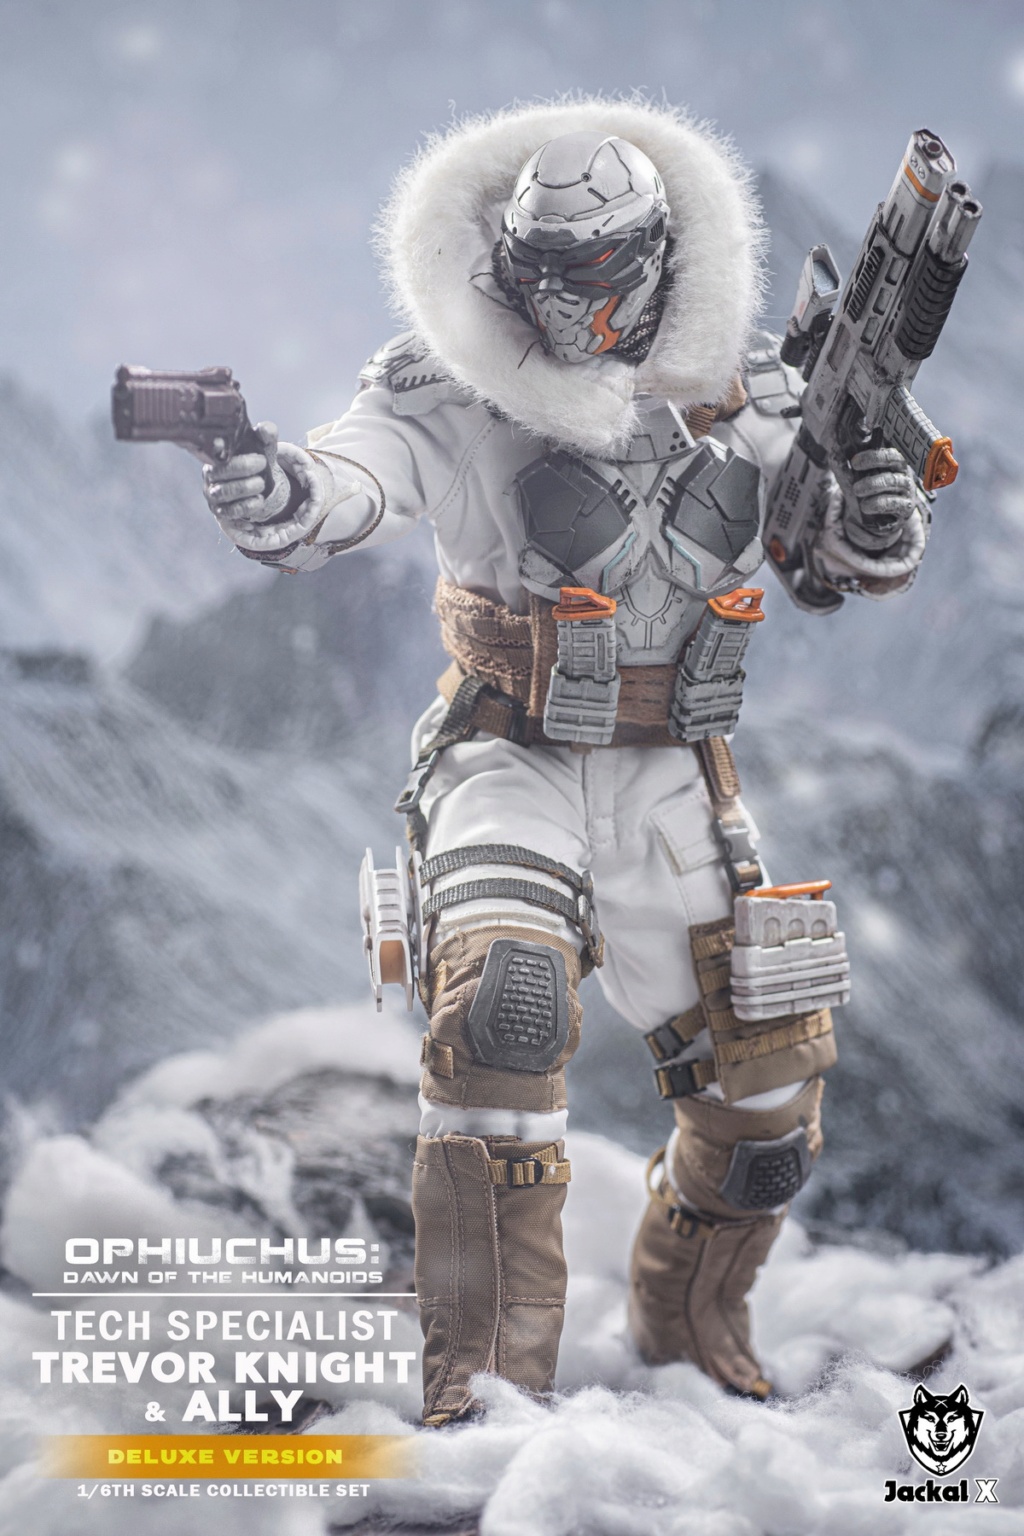 Ally - NEW PRODUCT: JackalX: JX014 1/6 Scale Tech Specialist Trevor Knight & Ally action figures 17065711